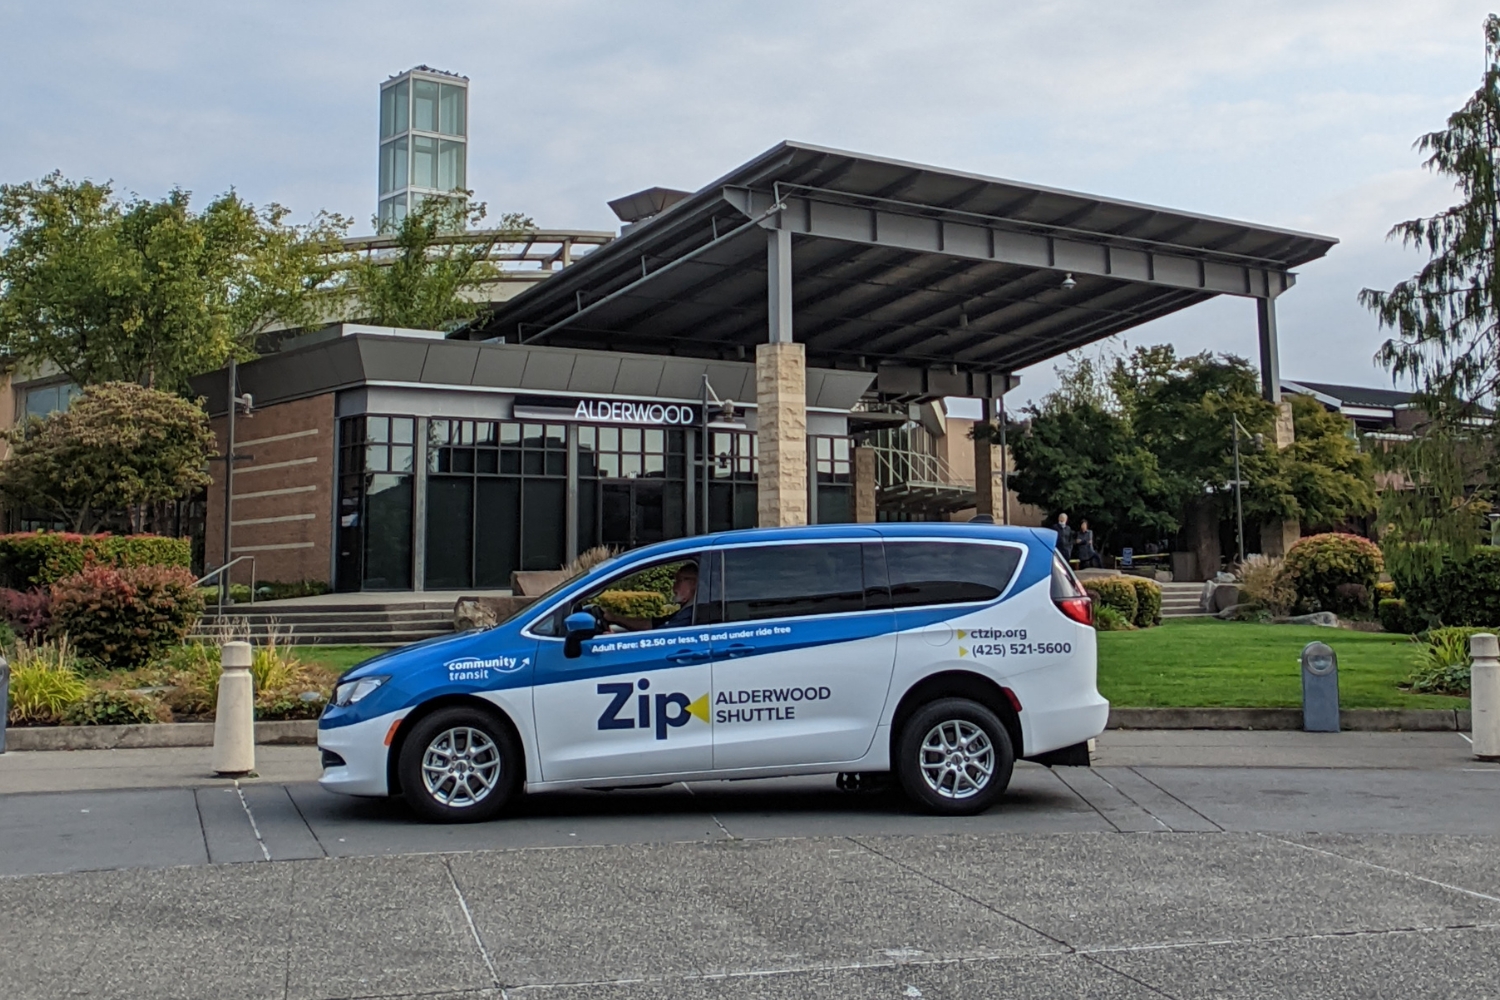 A Zip Shuttle parked at Alderwood Mall